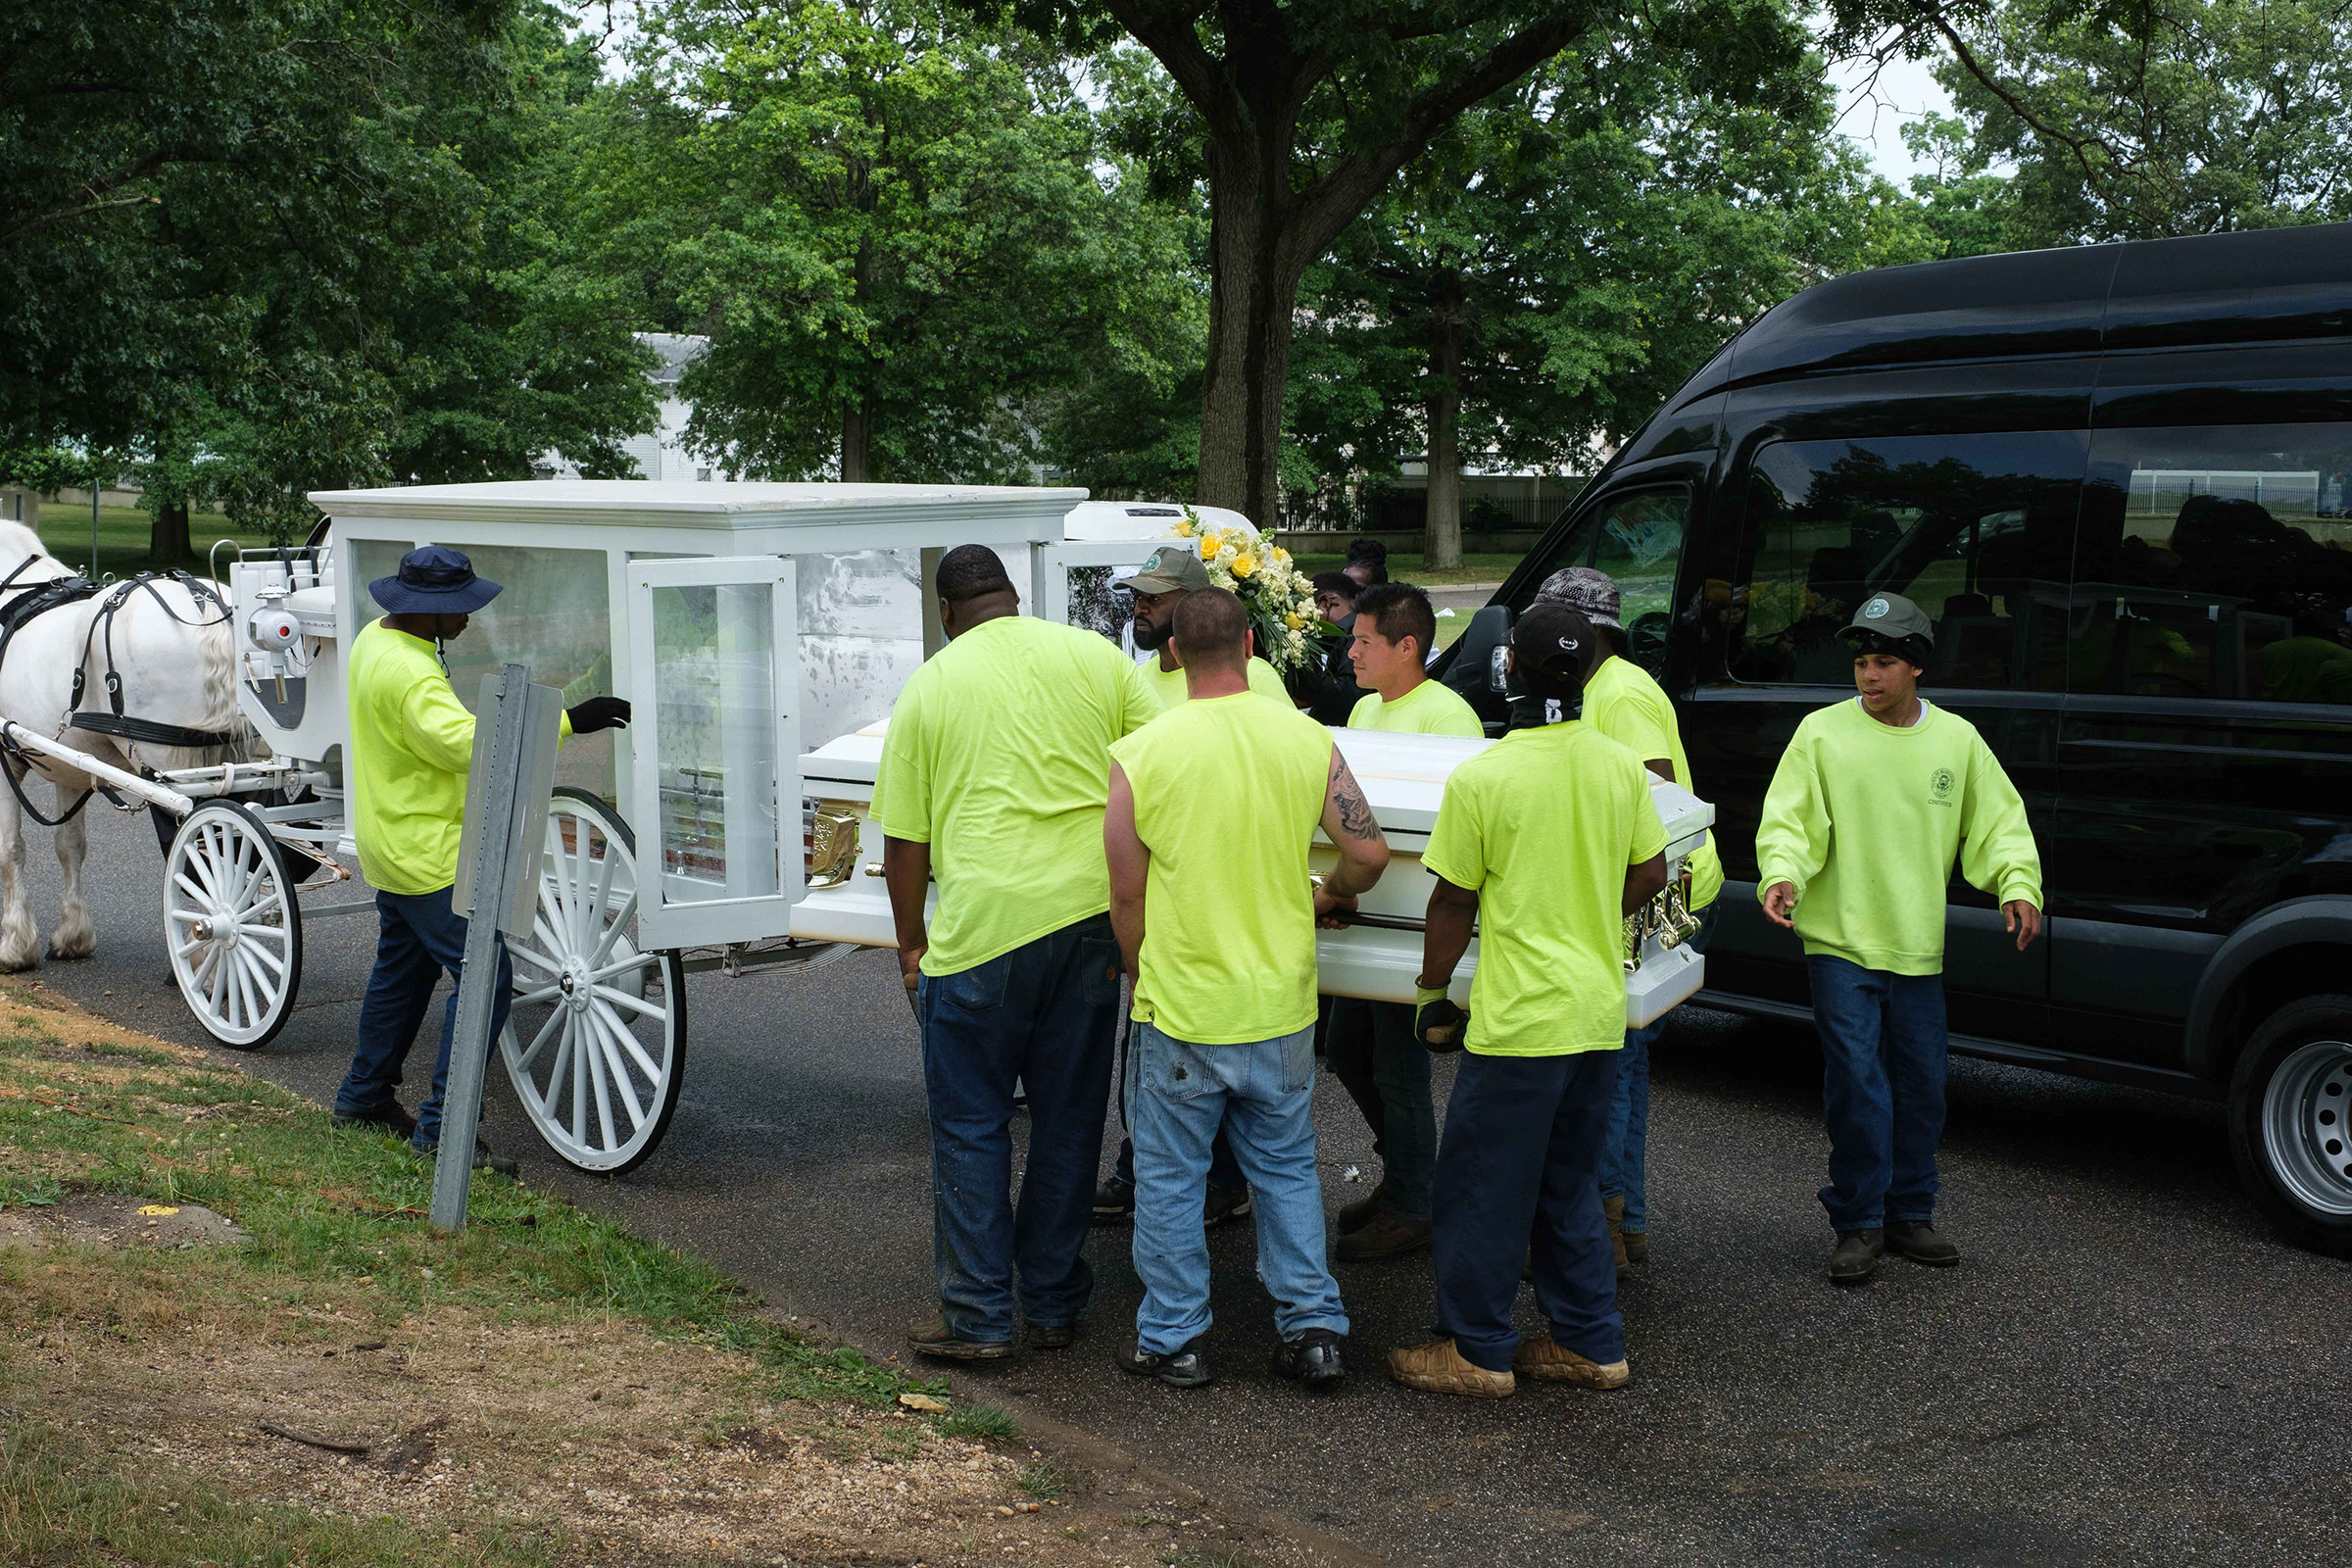 Cemetery workers carry Jamel Floyd’s coffin to the burial site at Greenfield Cemetery in Hempstead, N.Y., on June 30. (Yuki Iwamura)